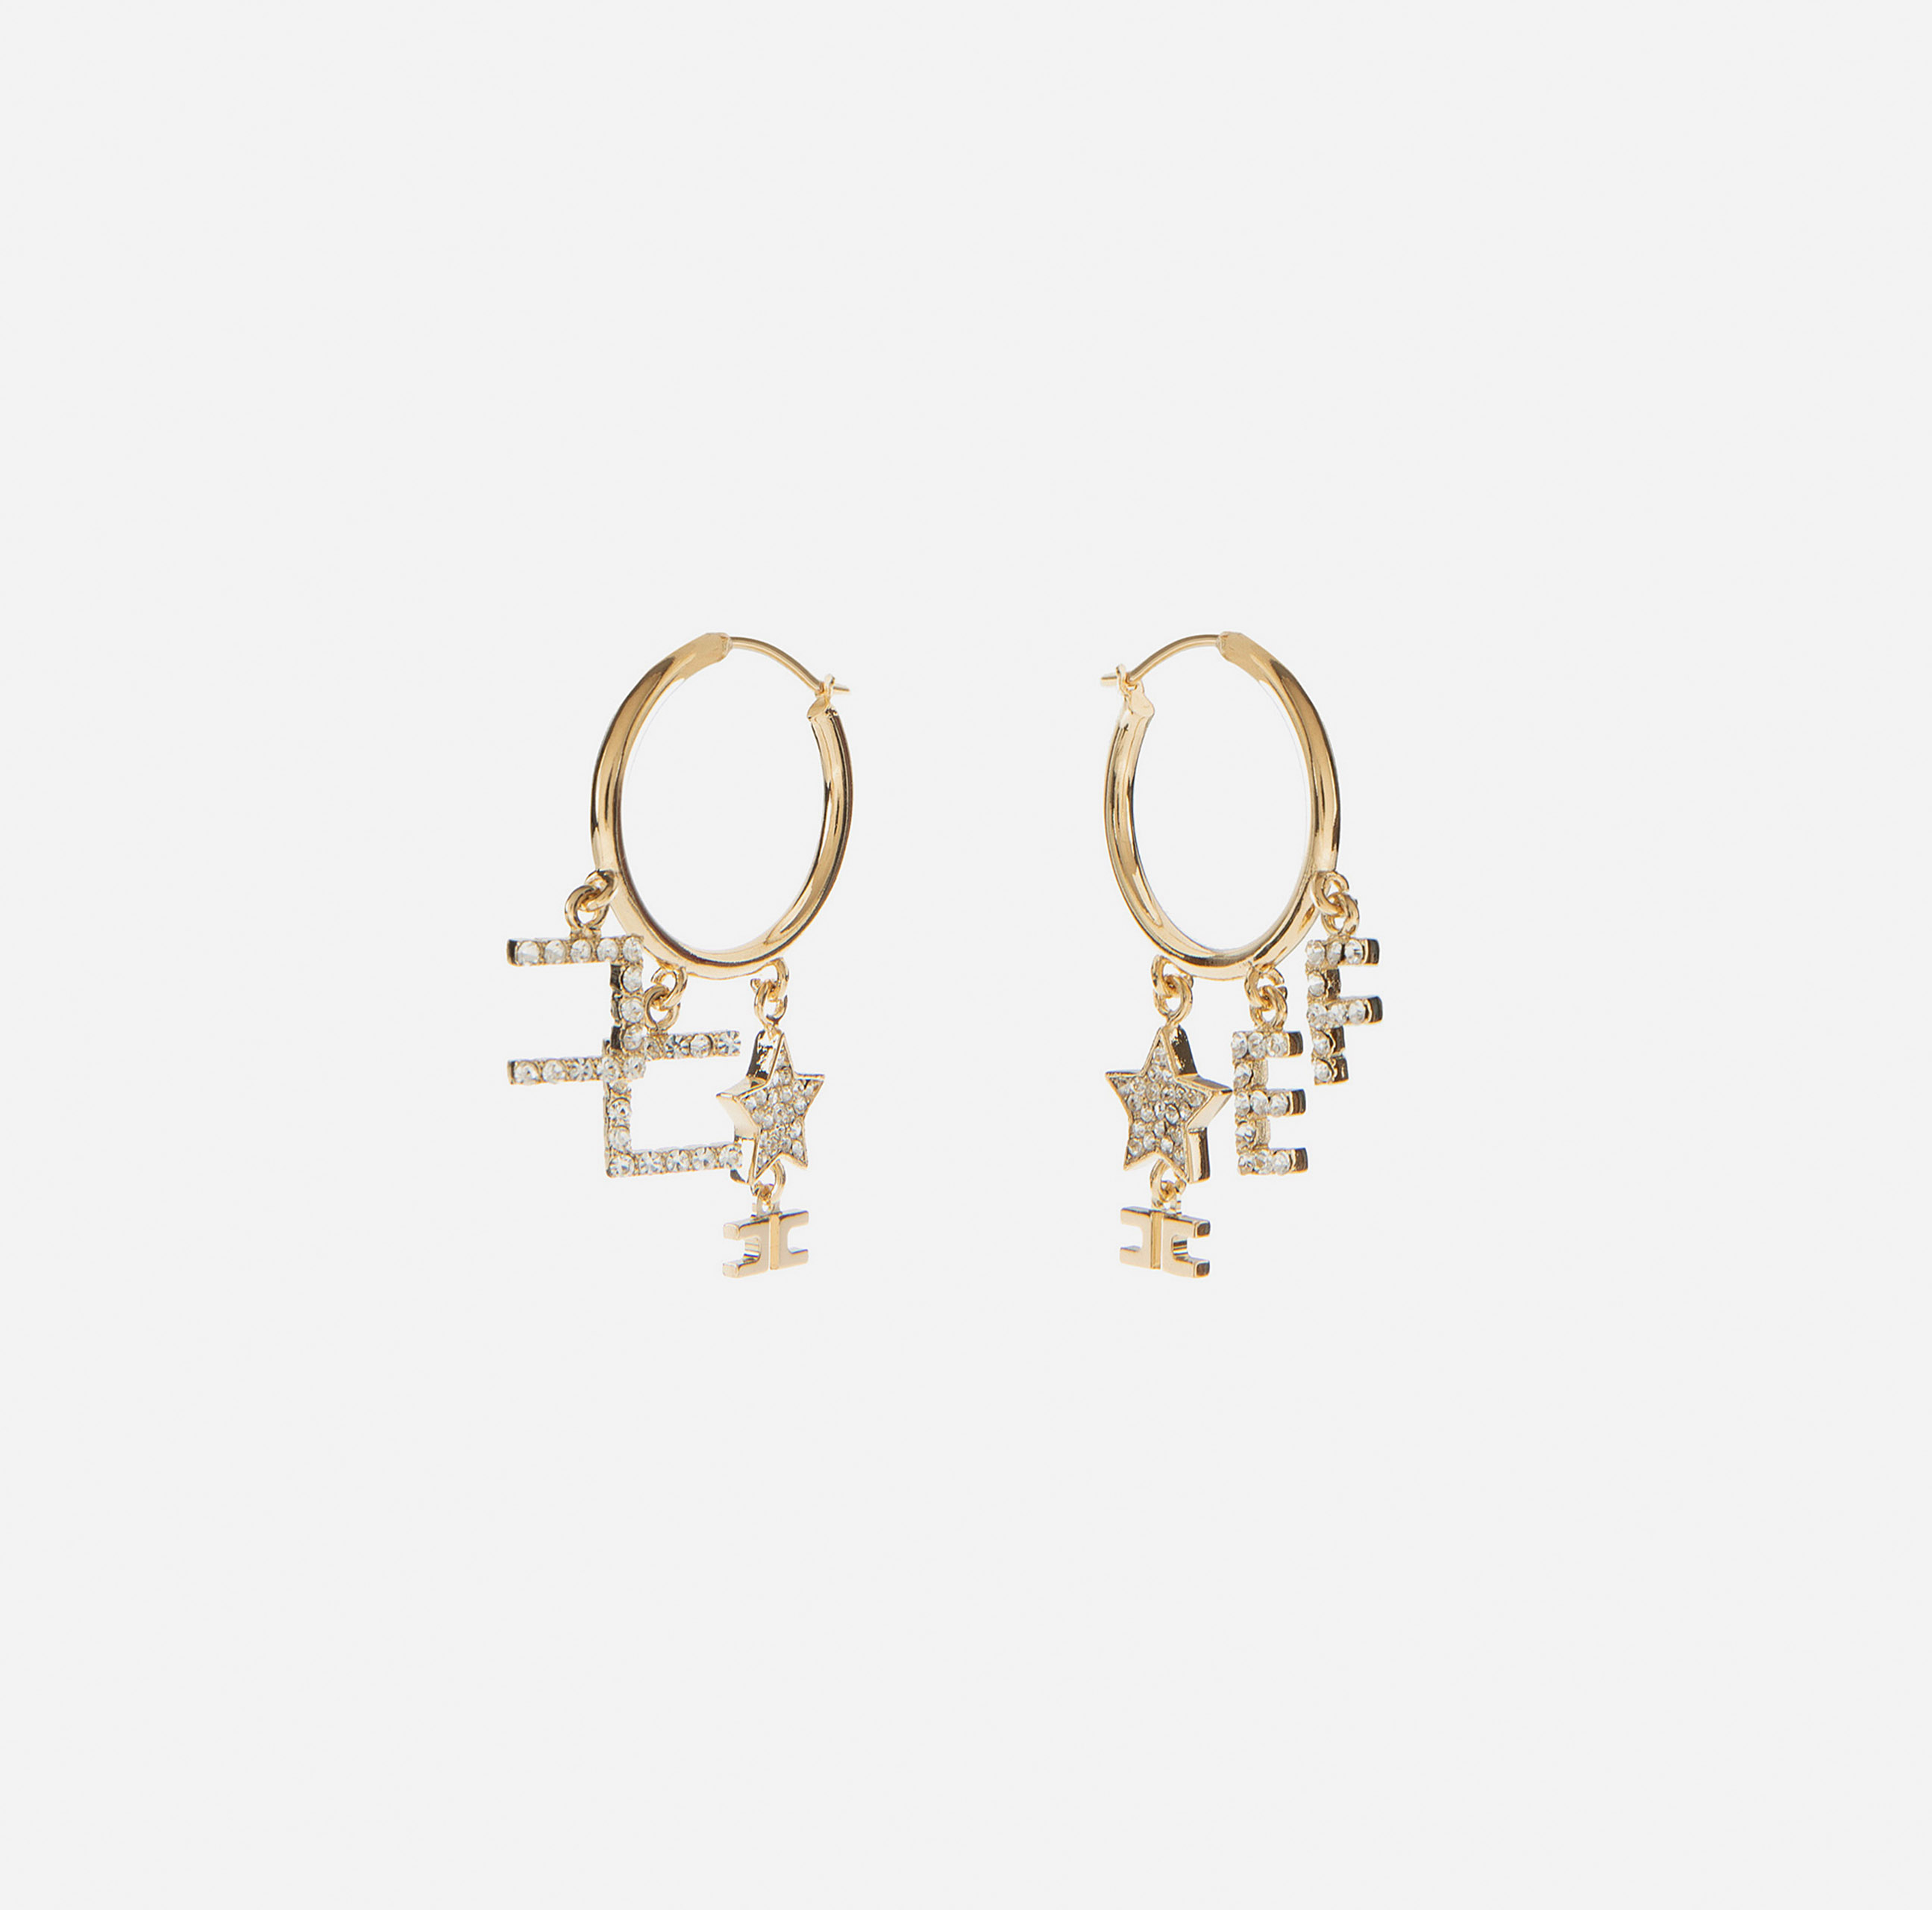 Hoop earrings with charms - ACCESSORI - Elisabetta Franchi